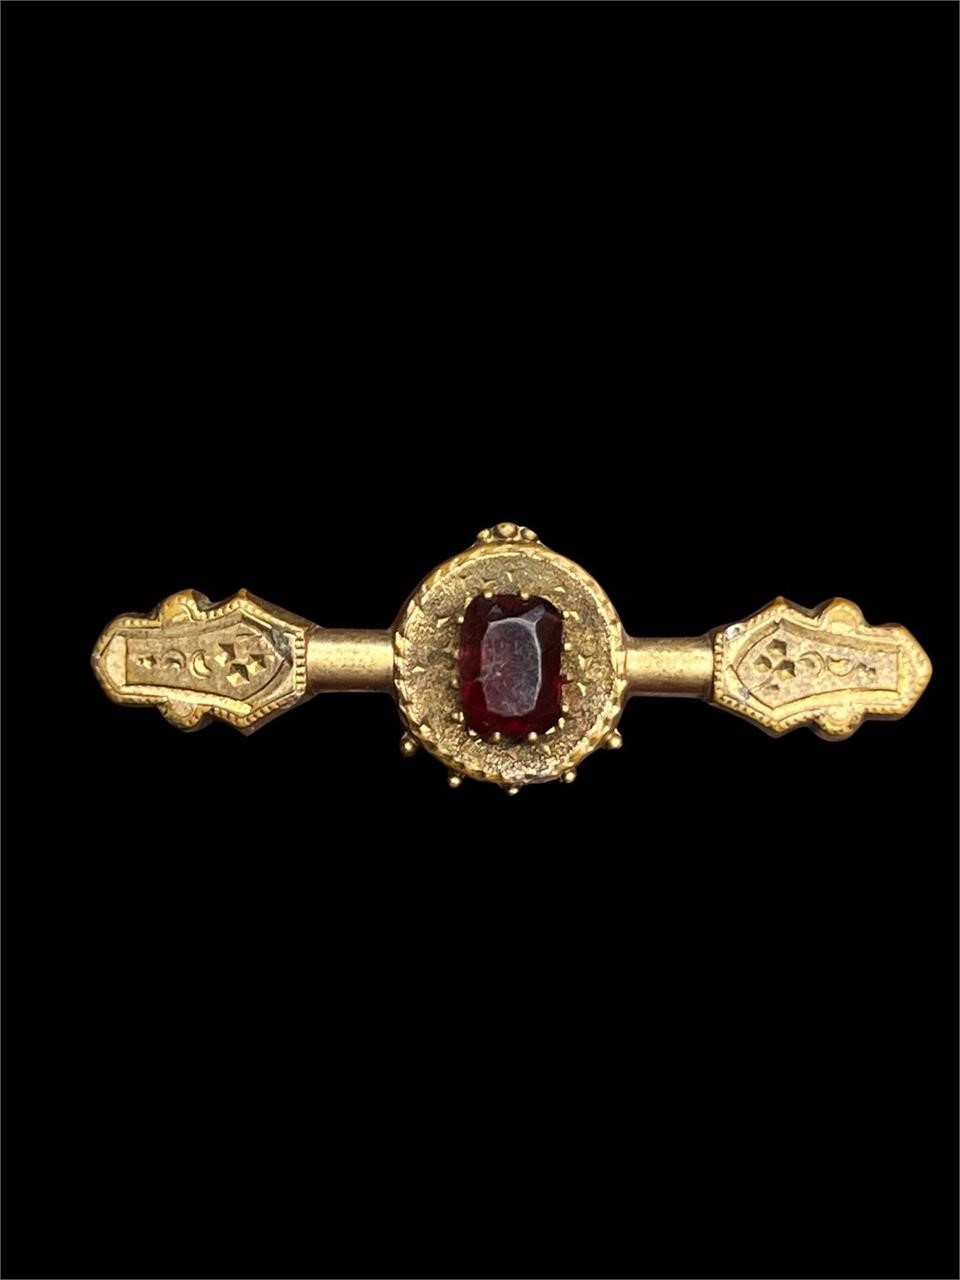 Antique Victorian 2.00ct Square Cut Ruby Gold Pin